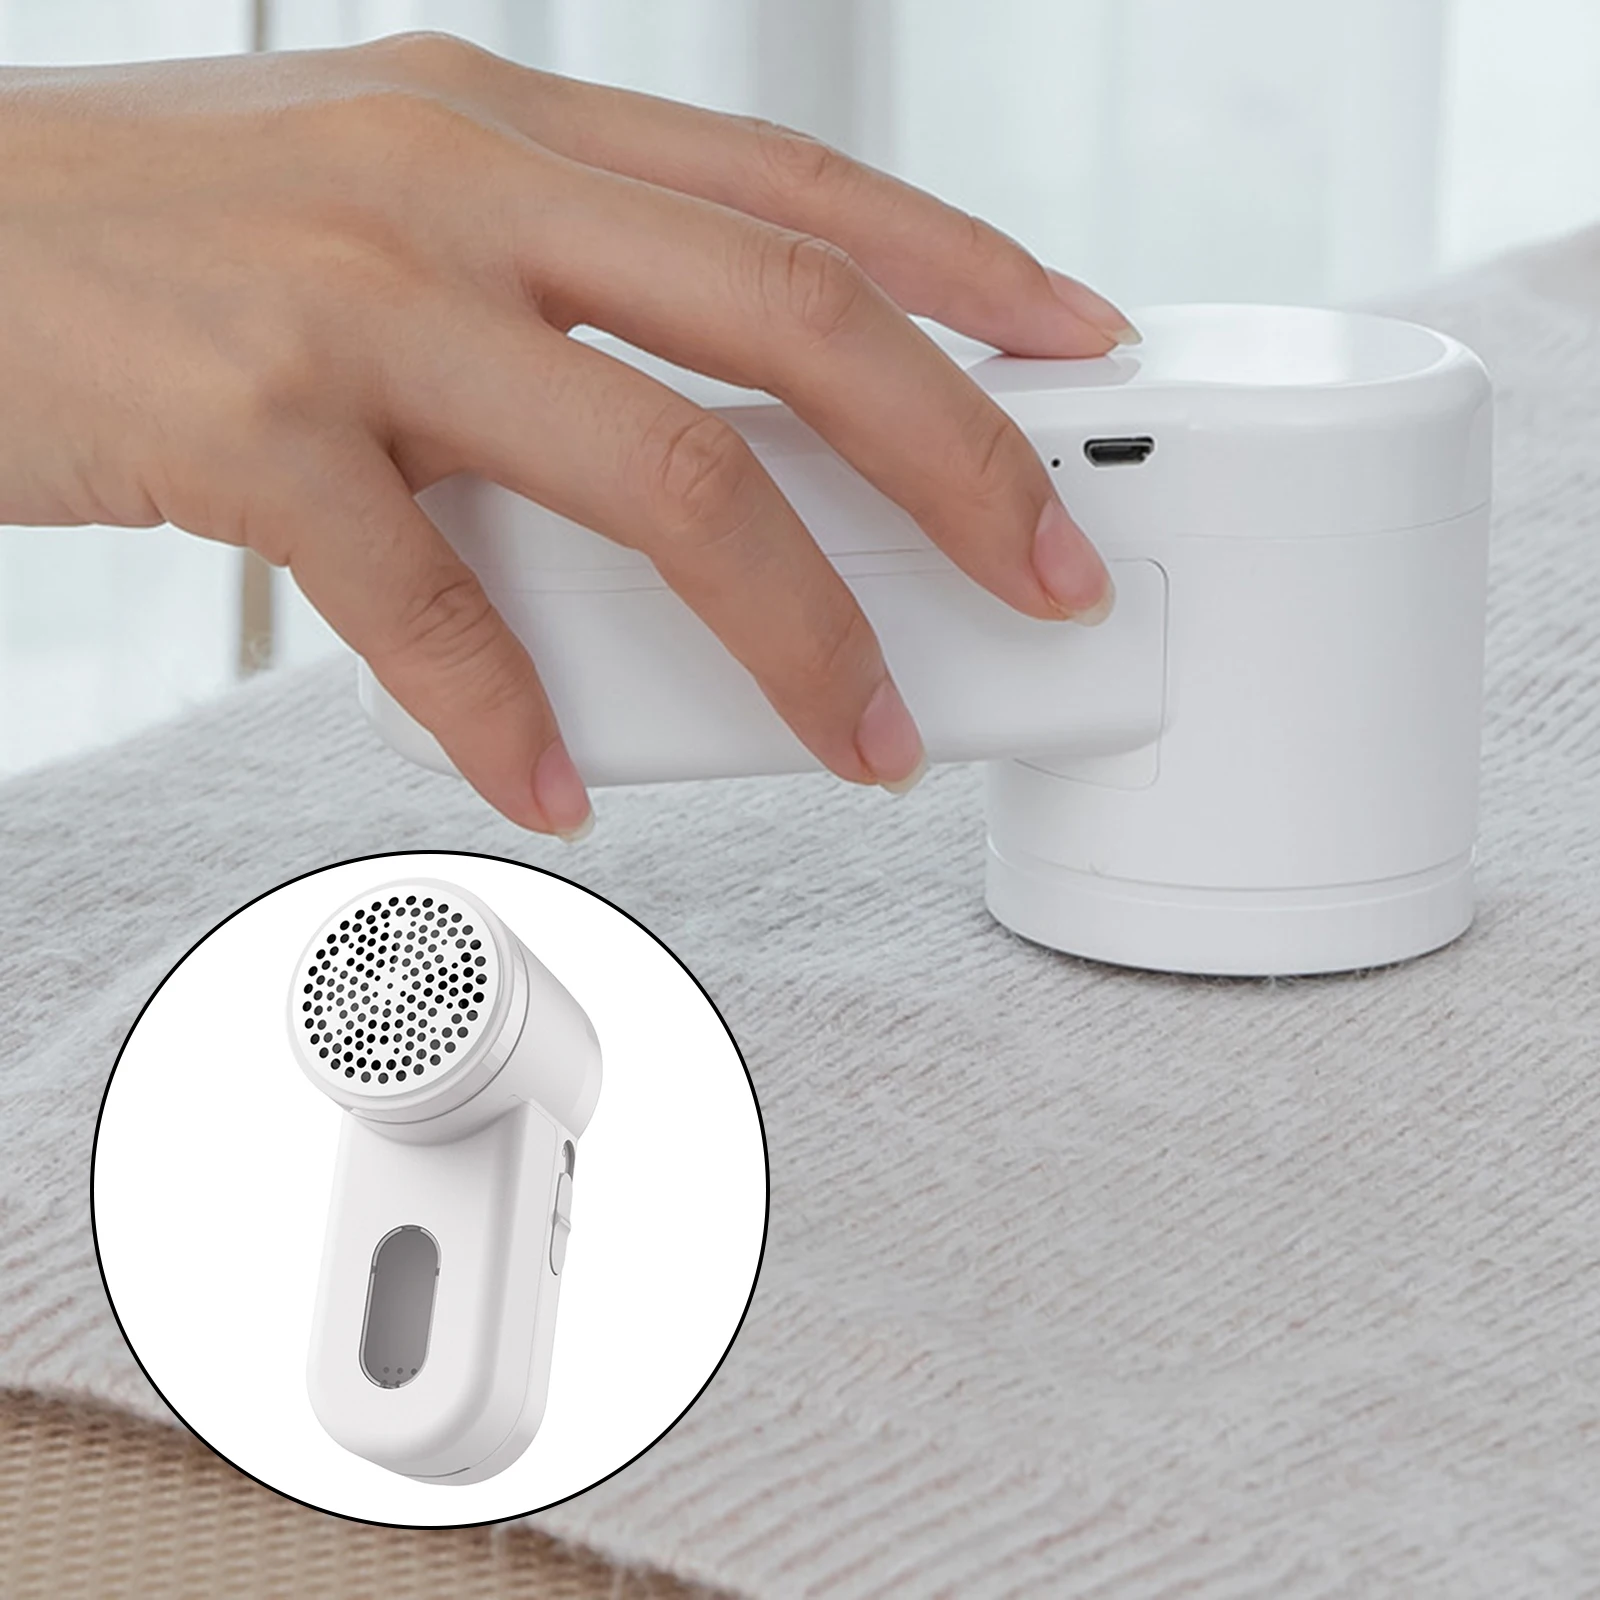 Portable USB Lint Remover  Clothes Sweater Coat Sofa Clothes Fuzz Lint Balls  Fuzz Remover Household Cleaning Tool